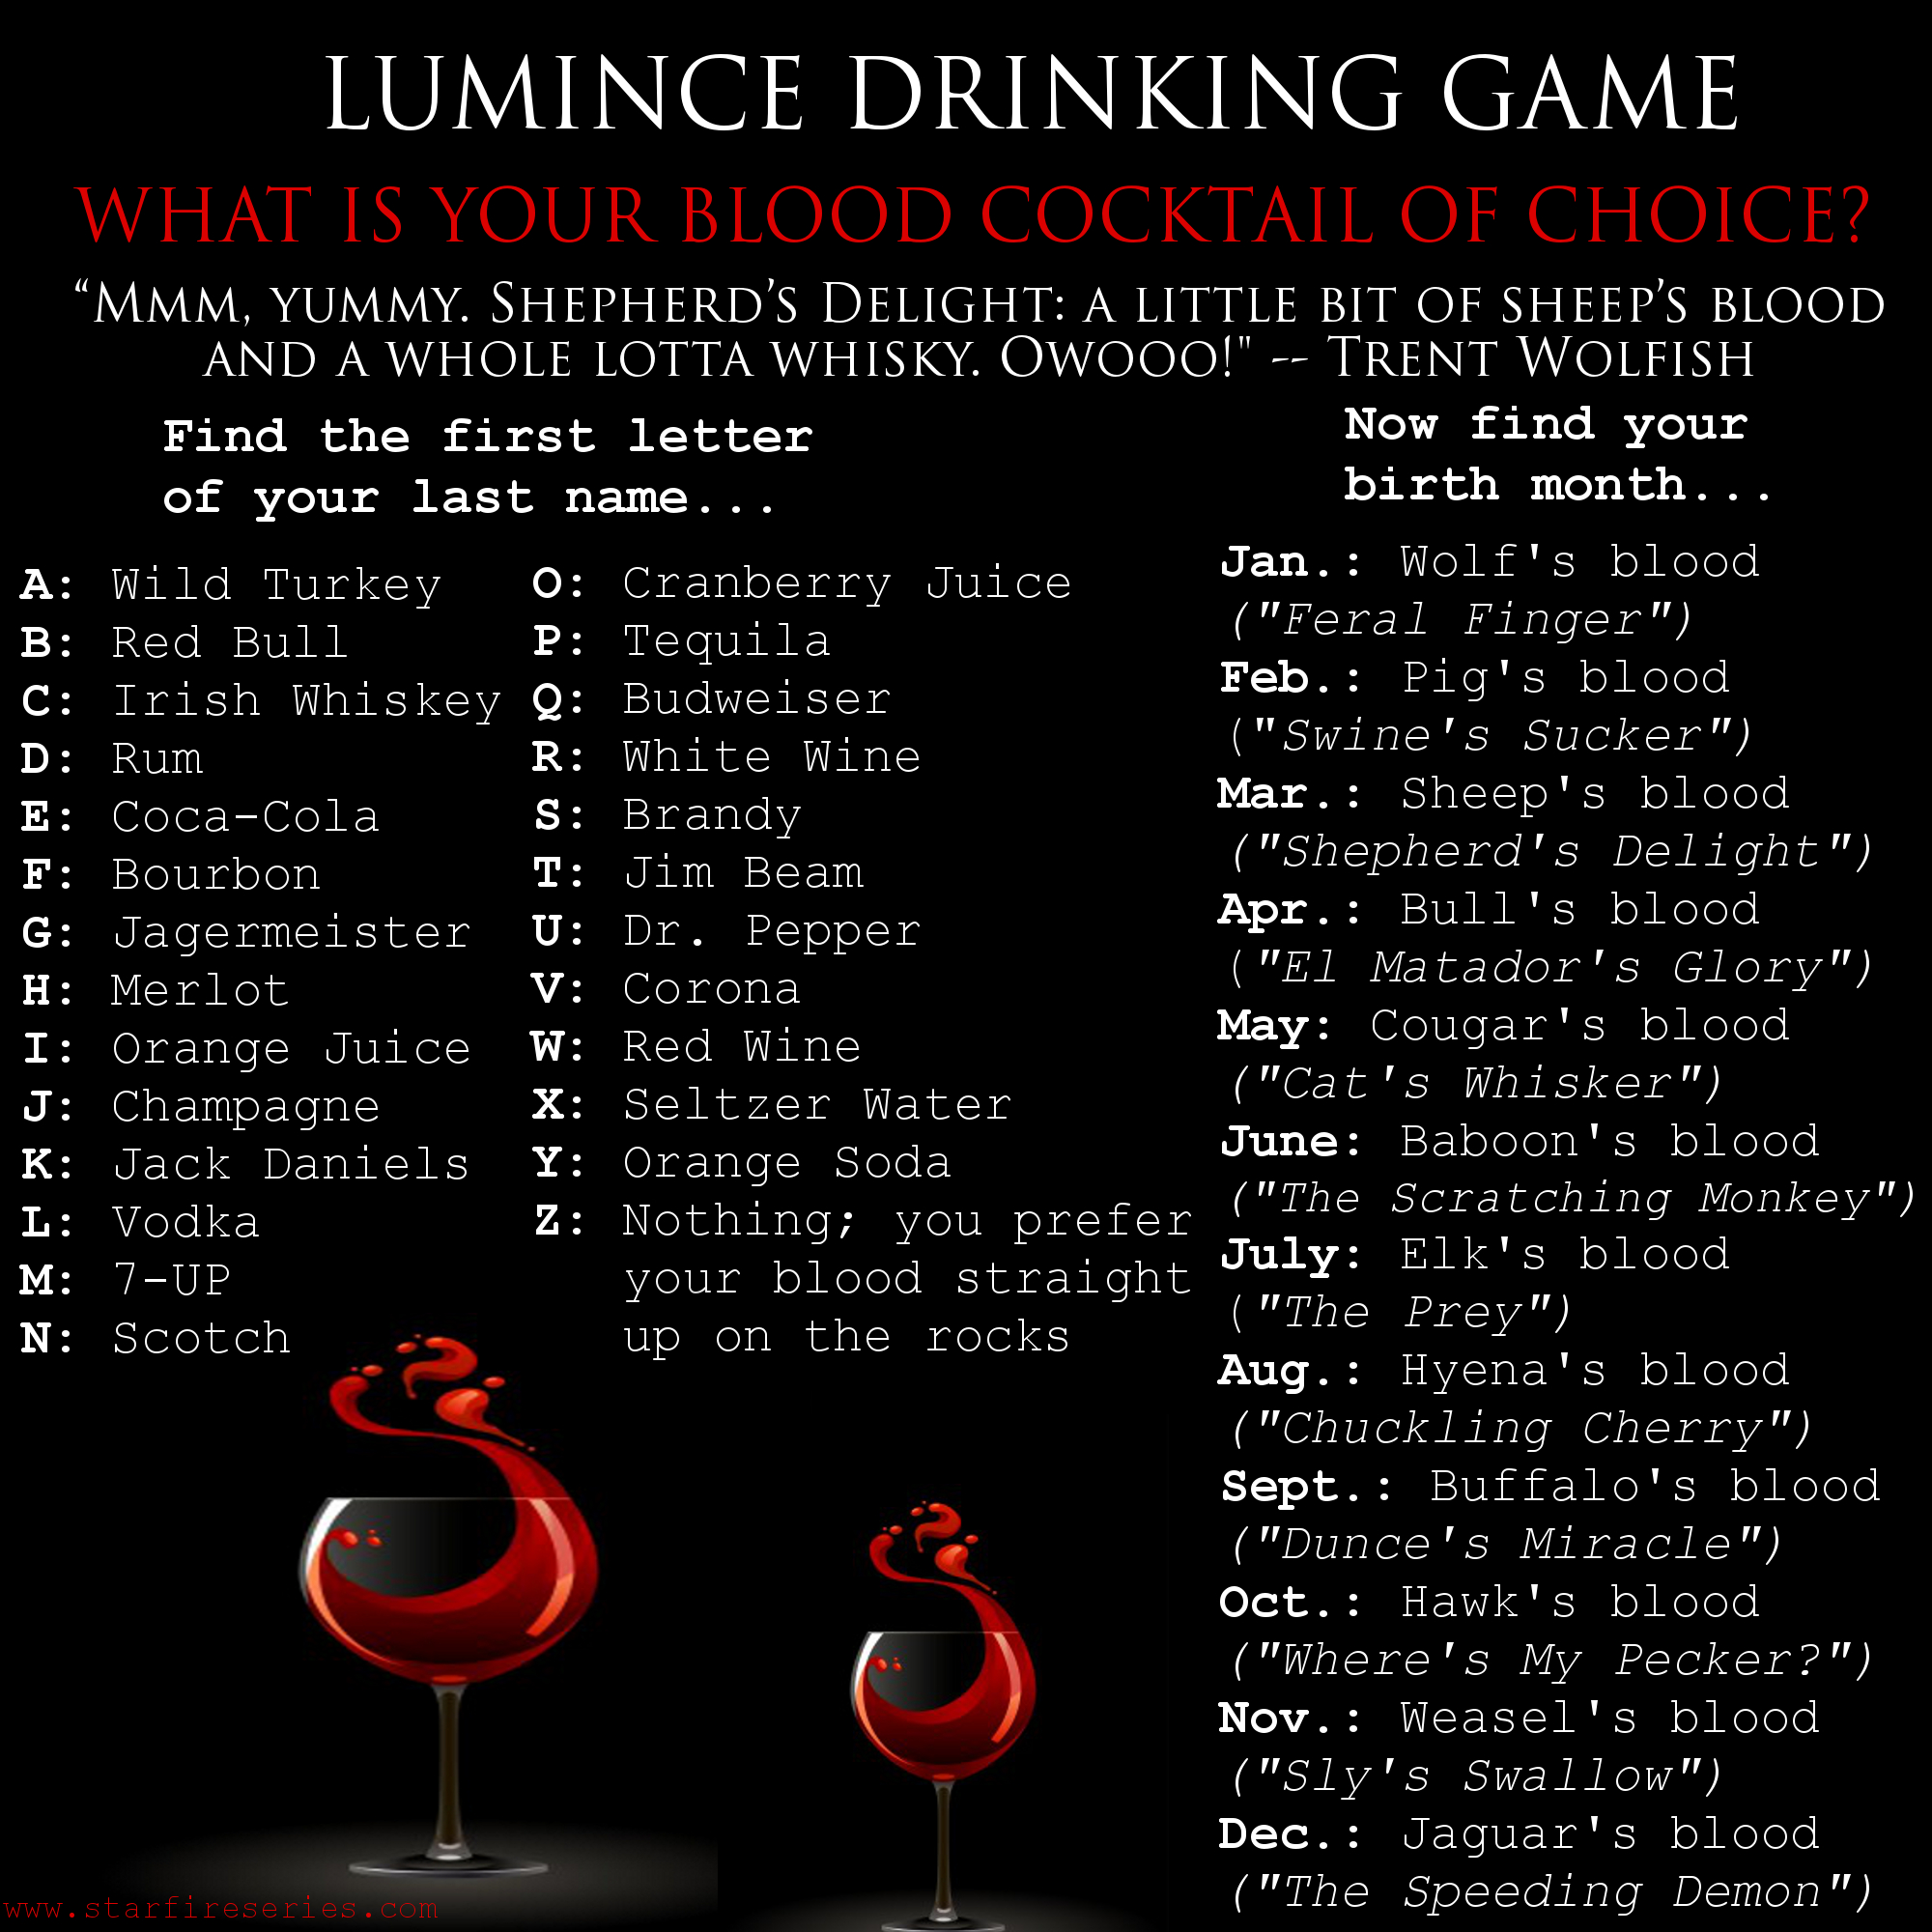 Lumince Drinking Game